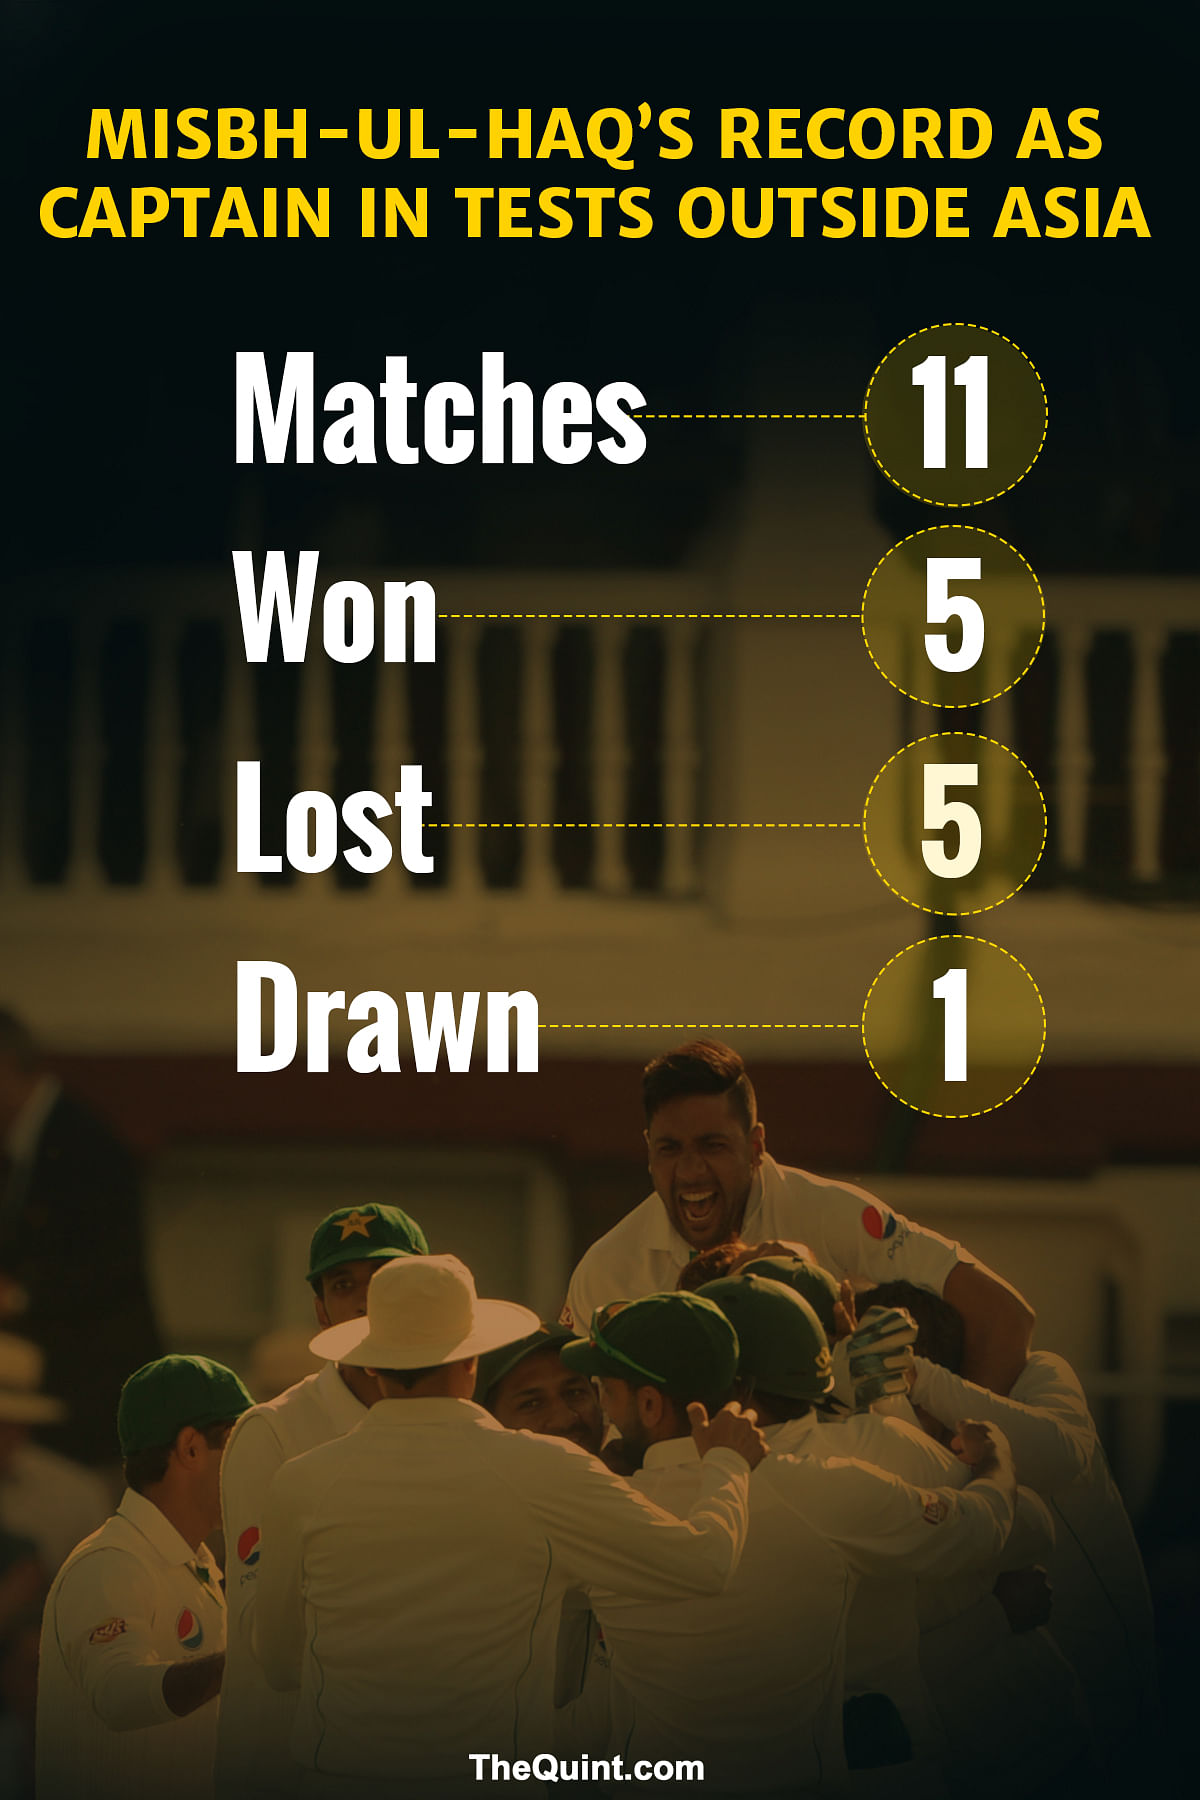 Yasir Shah, skipper Misbah and also the batsman Misbah - players who stood out for Pakistan.